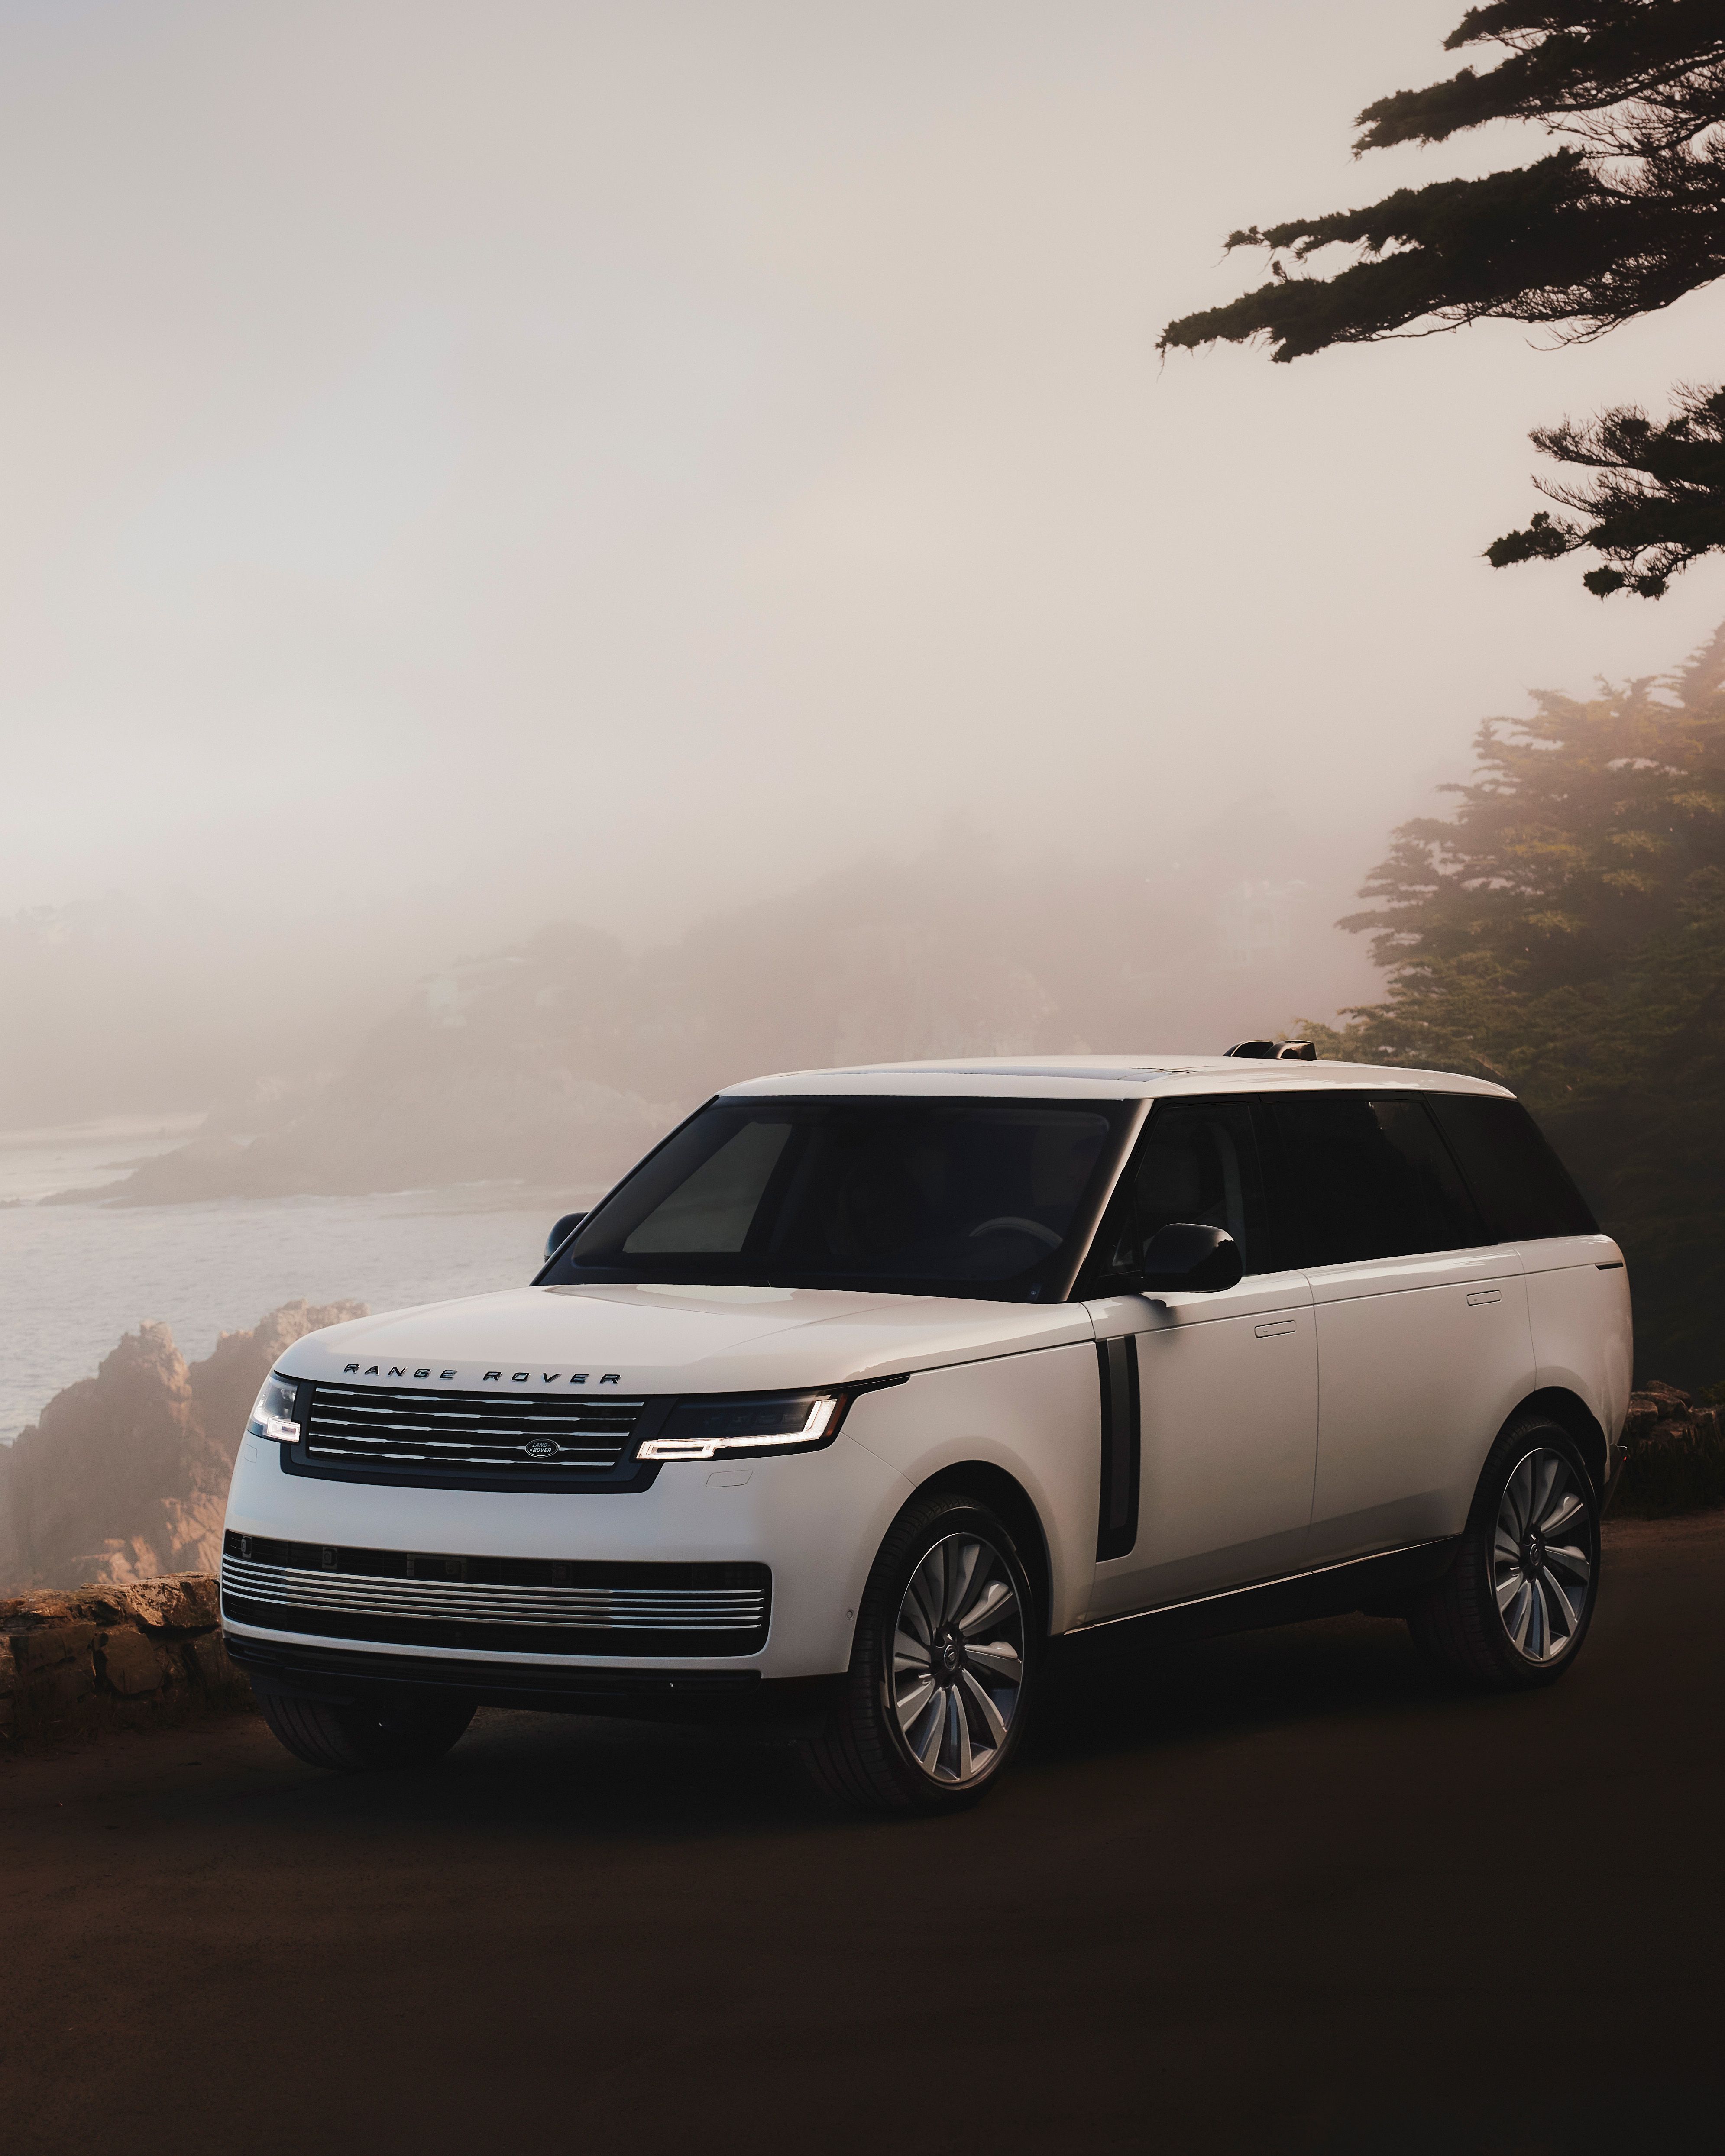 Which Land Rover Model Is Right for You?